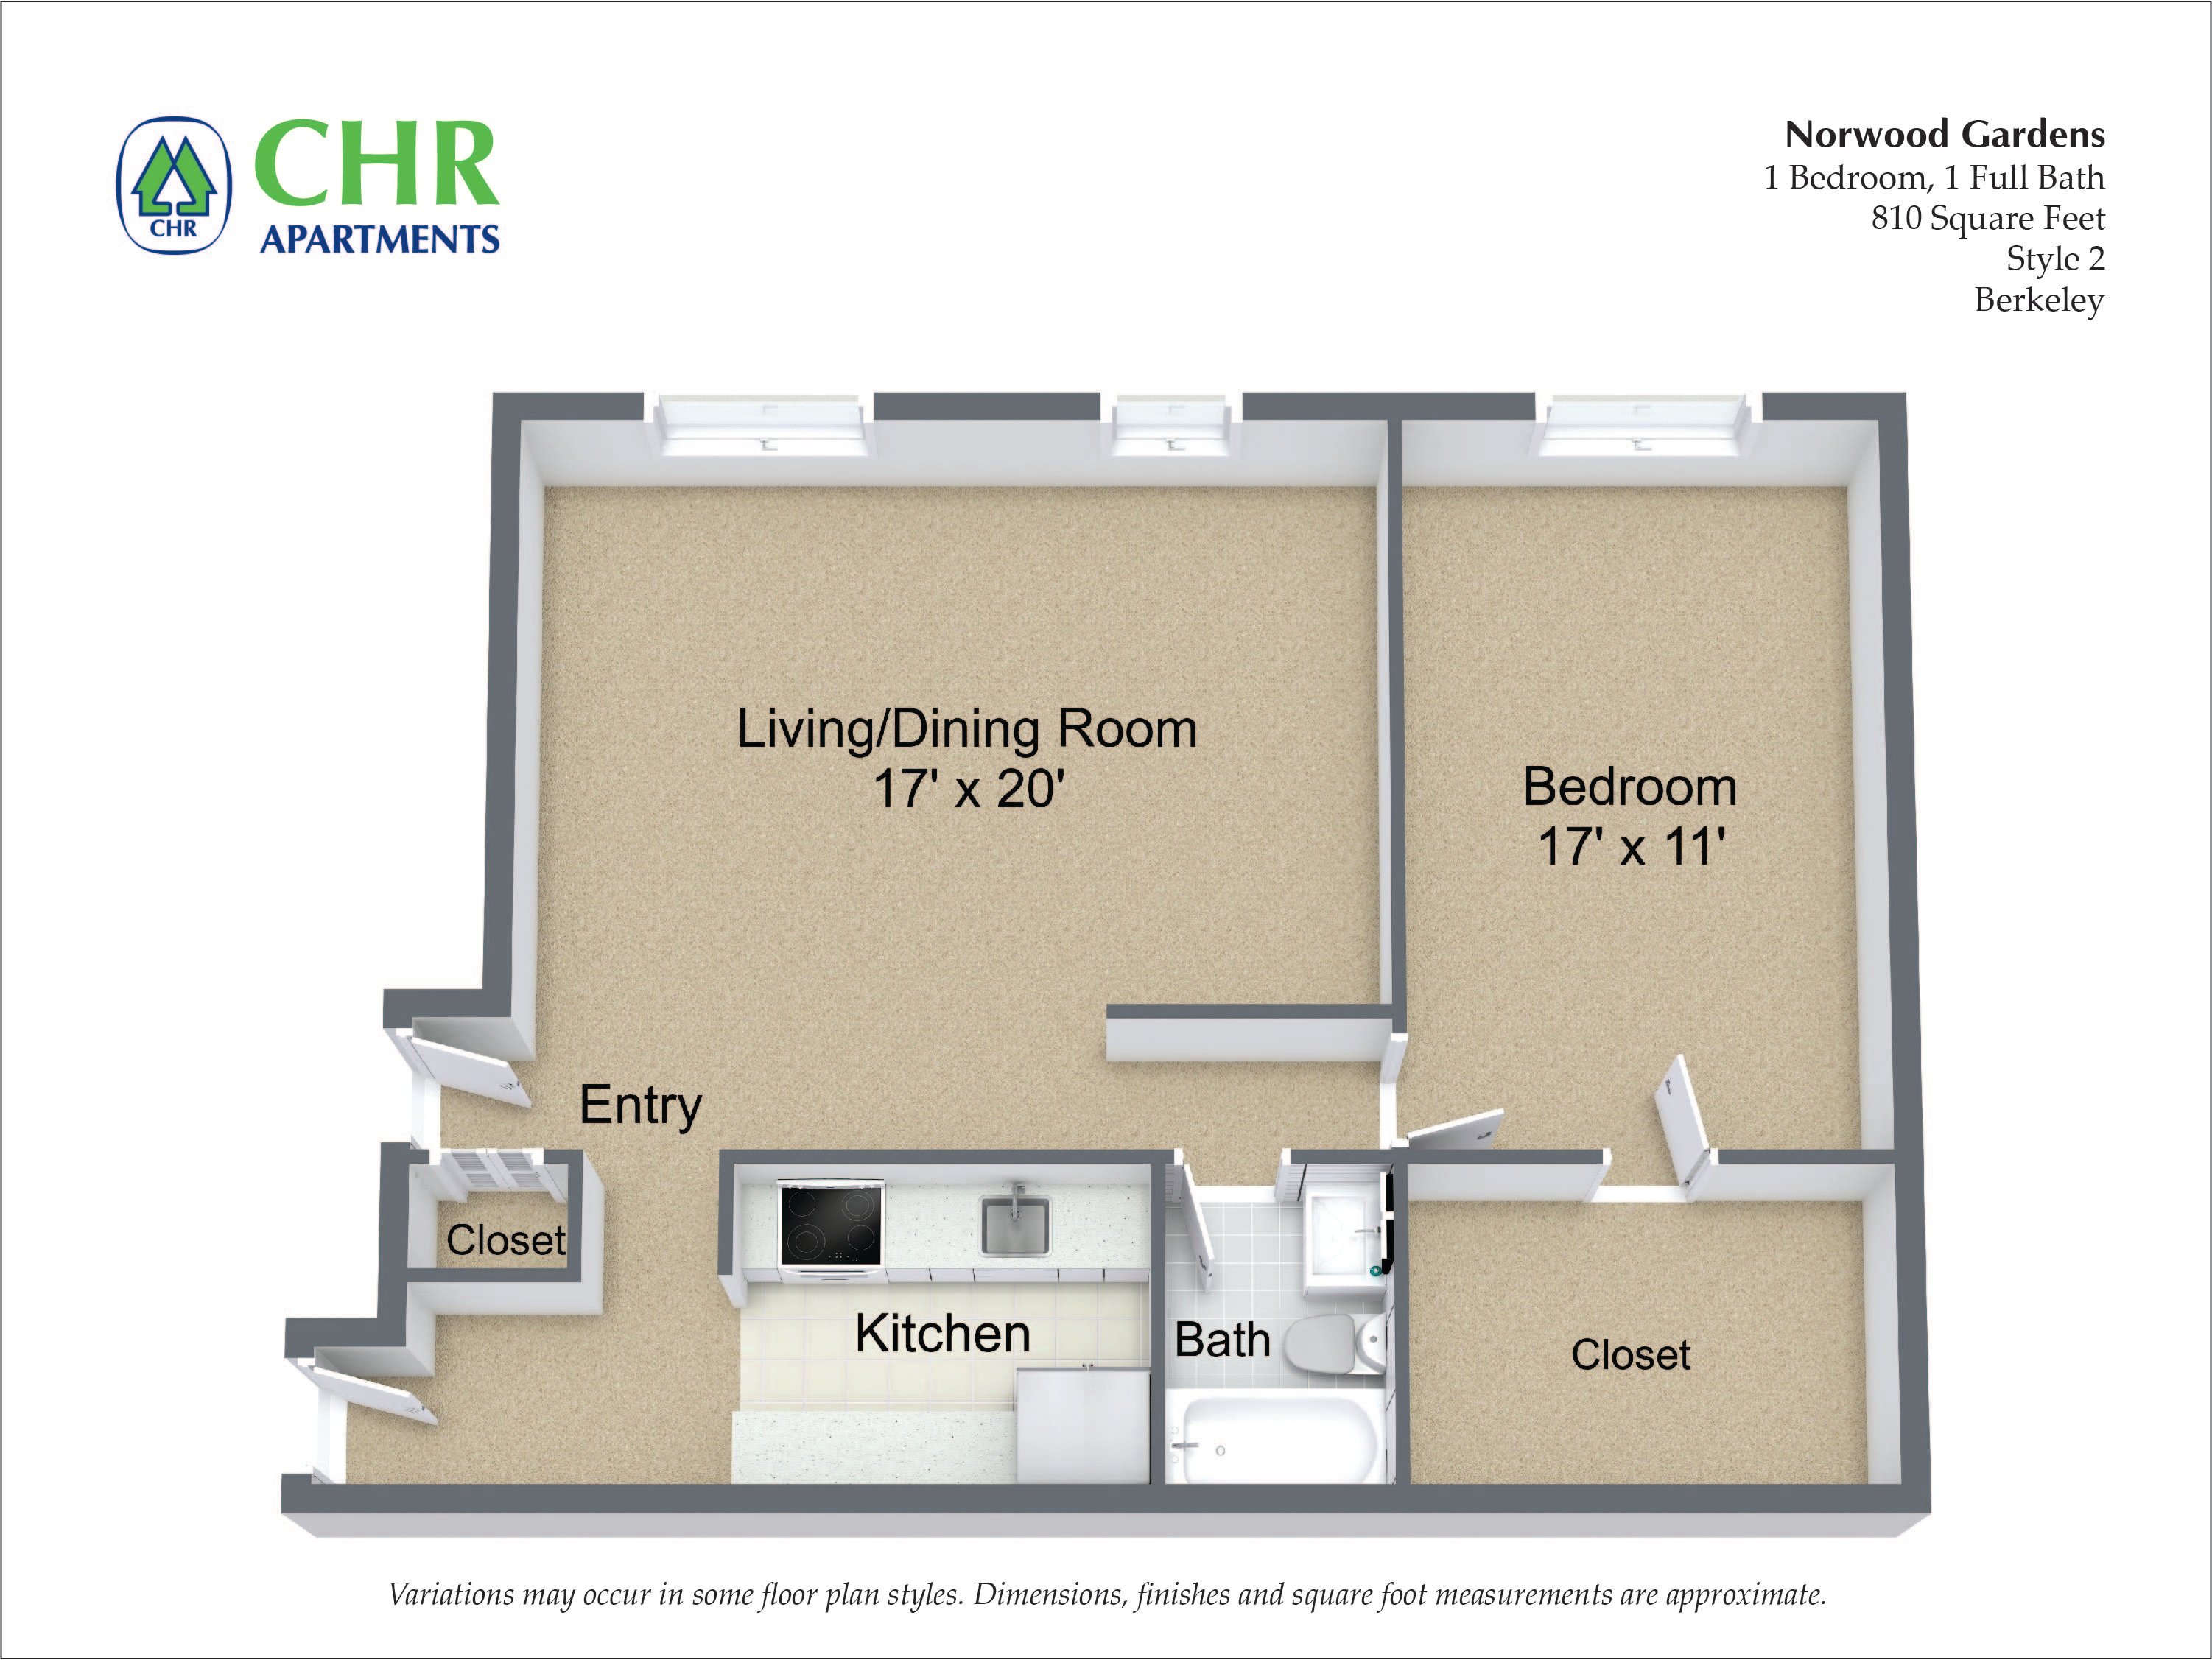 Click to view 1 Bedroom with Walk-In Closets floor plan gallery